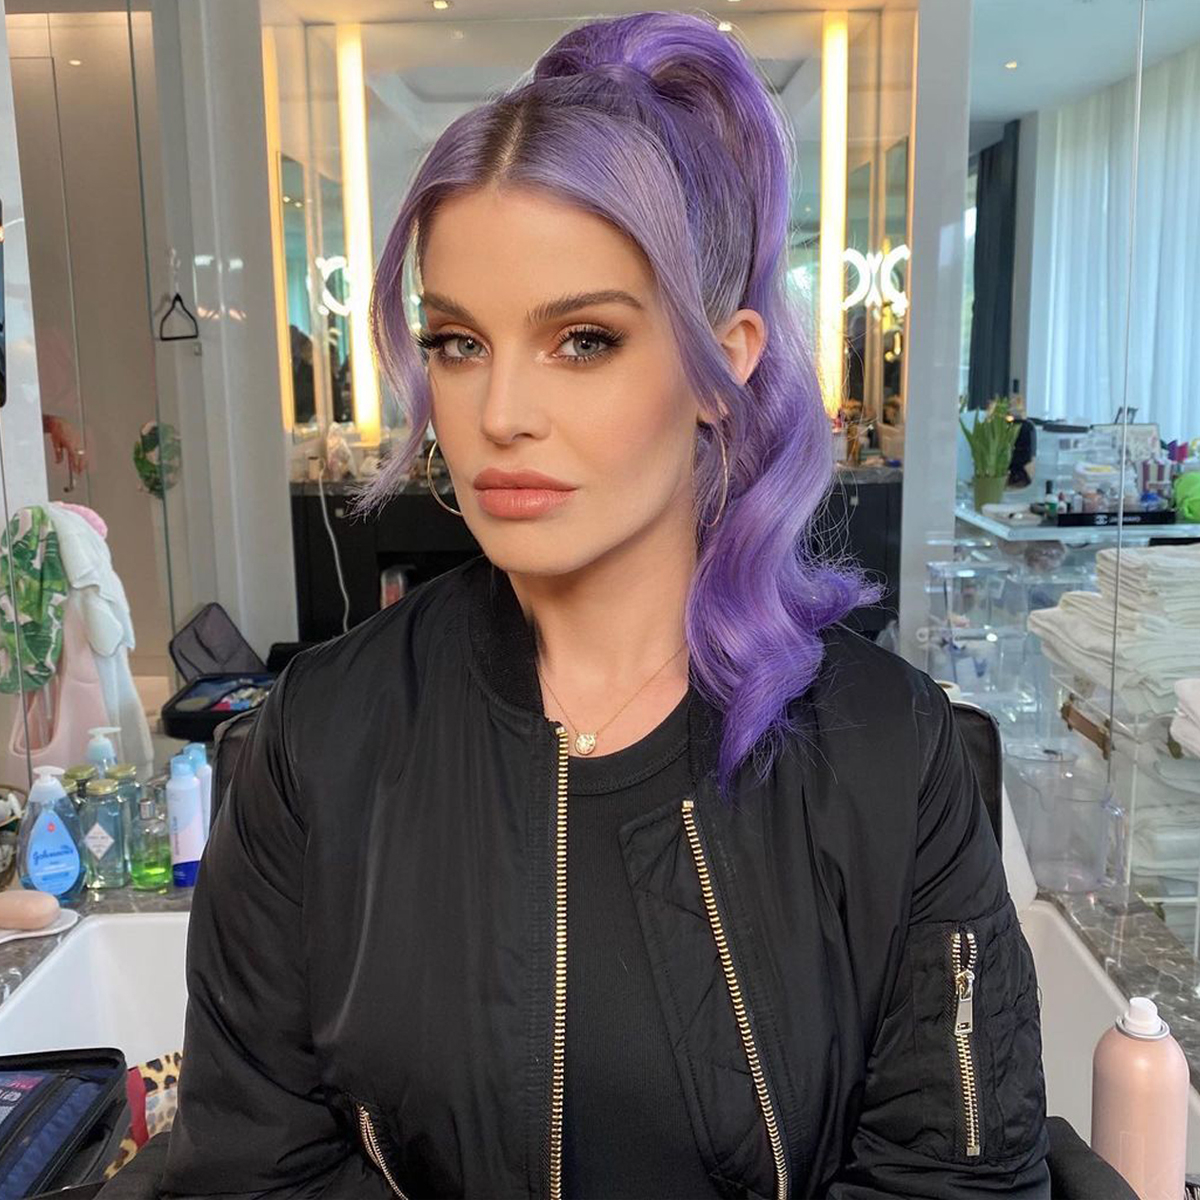 Rs 1200x1200 210525033502 1200 Kelly Osbourne Purple Hair Natural Makeup 052521 ?fit=around|1200 1200&output Quality=90&crop=1200 1200;center,top